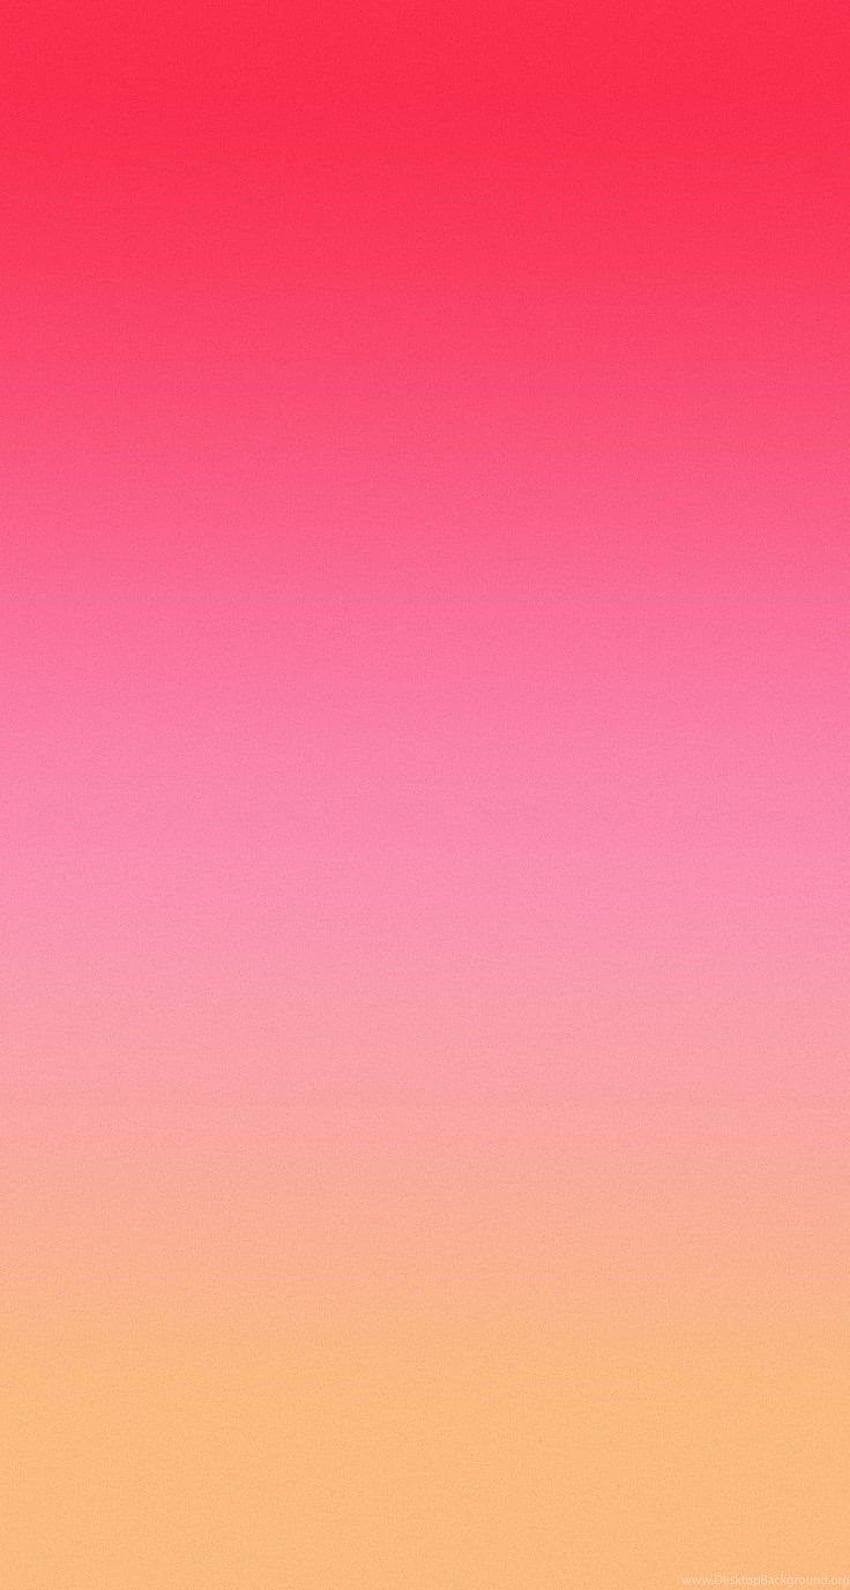 iphone 5c red wallpaper hd